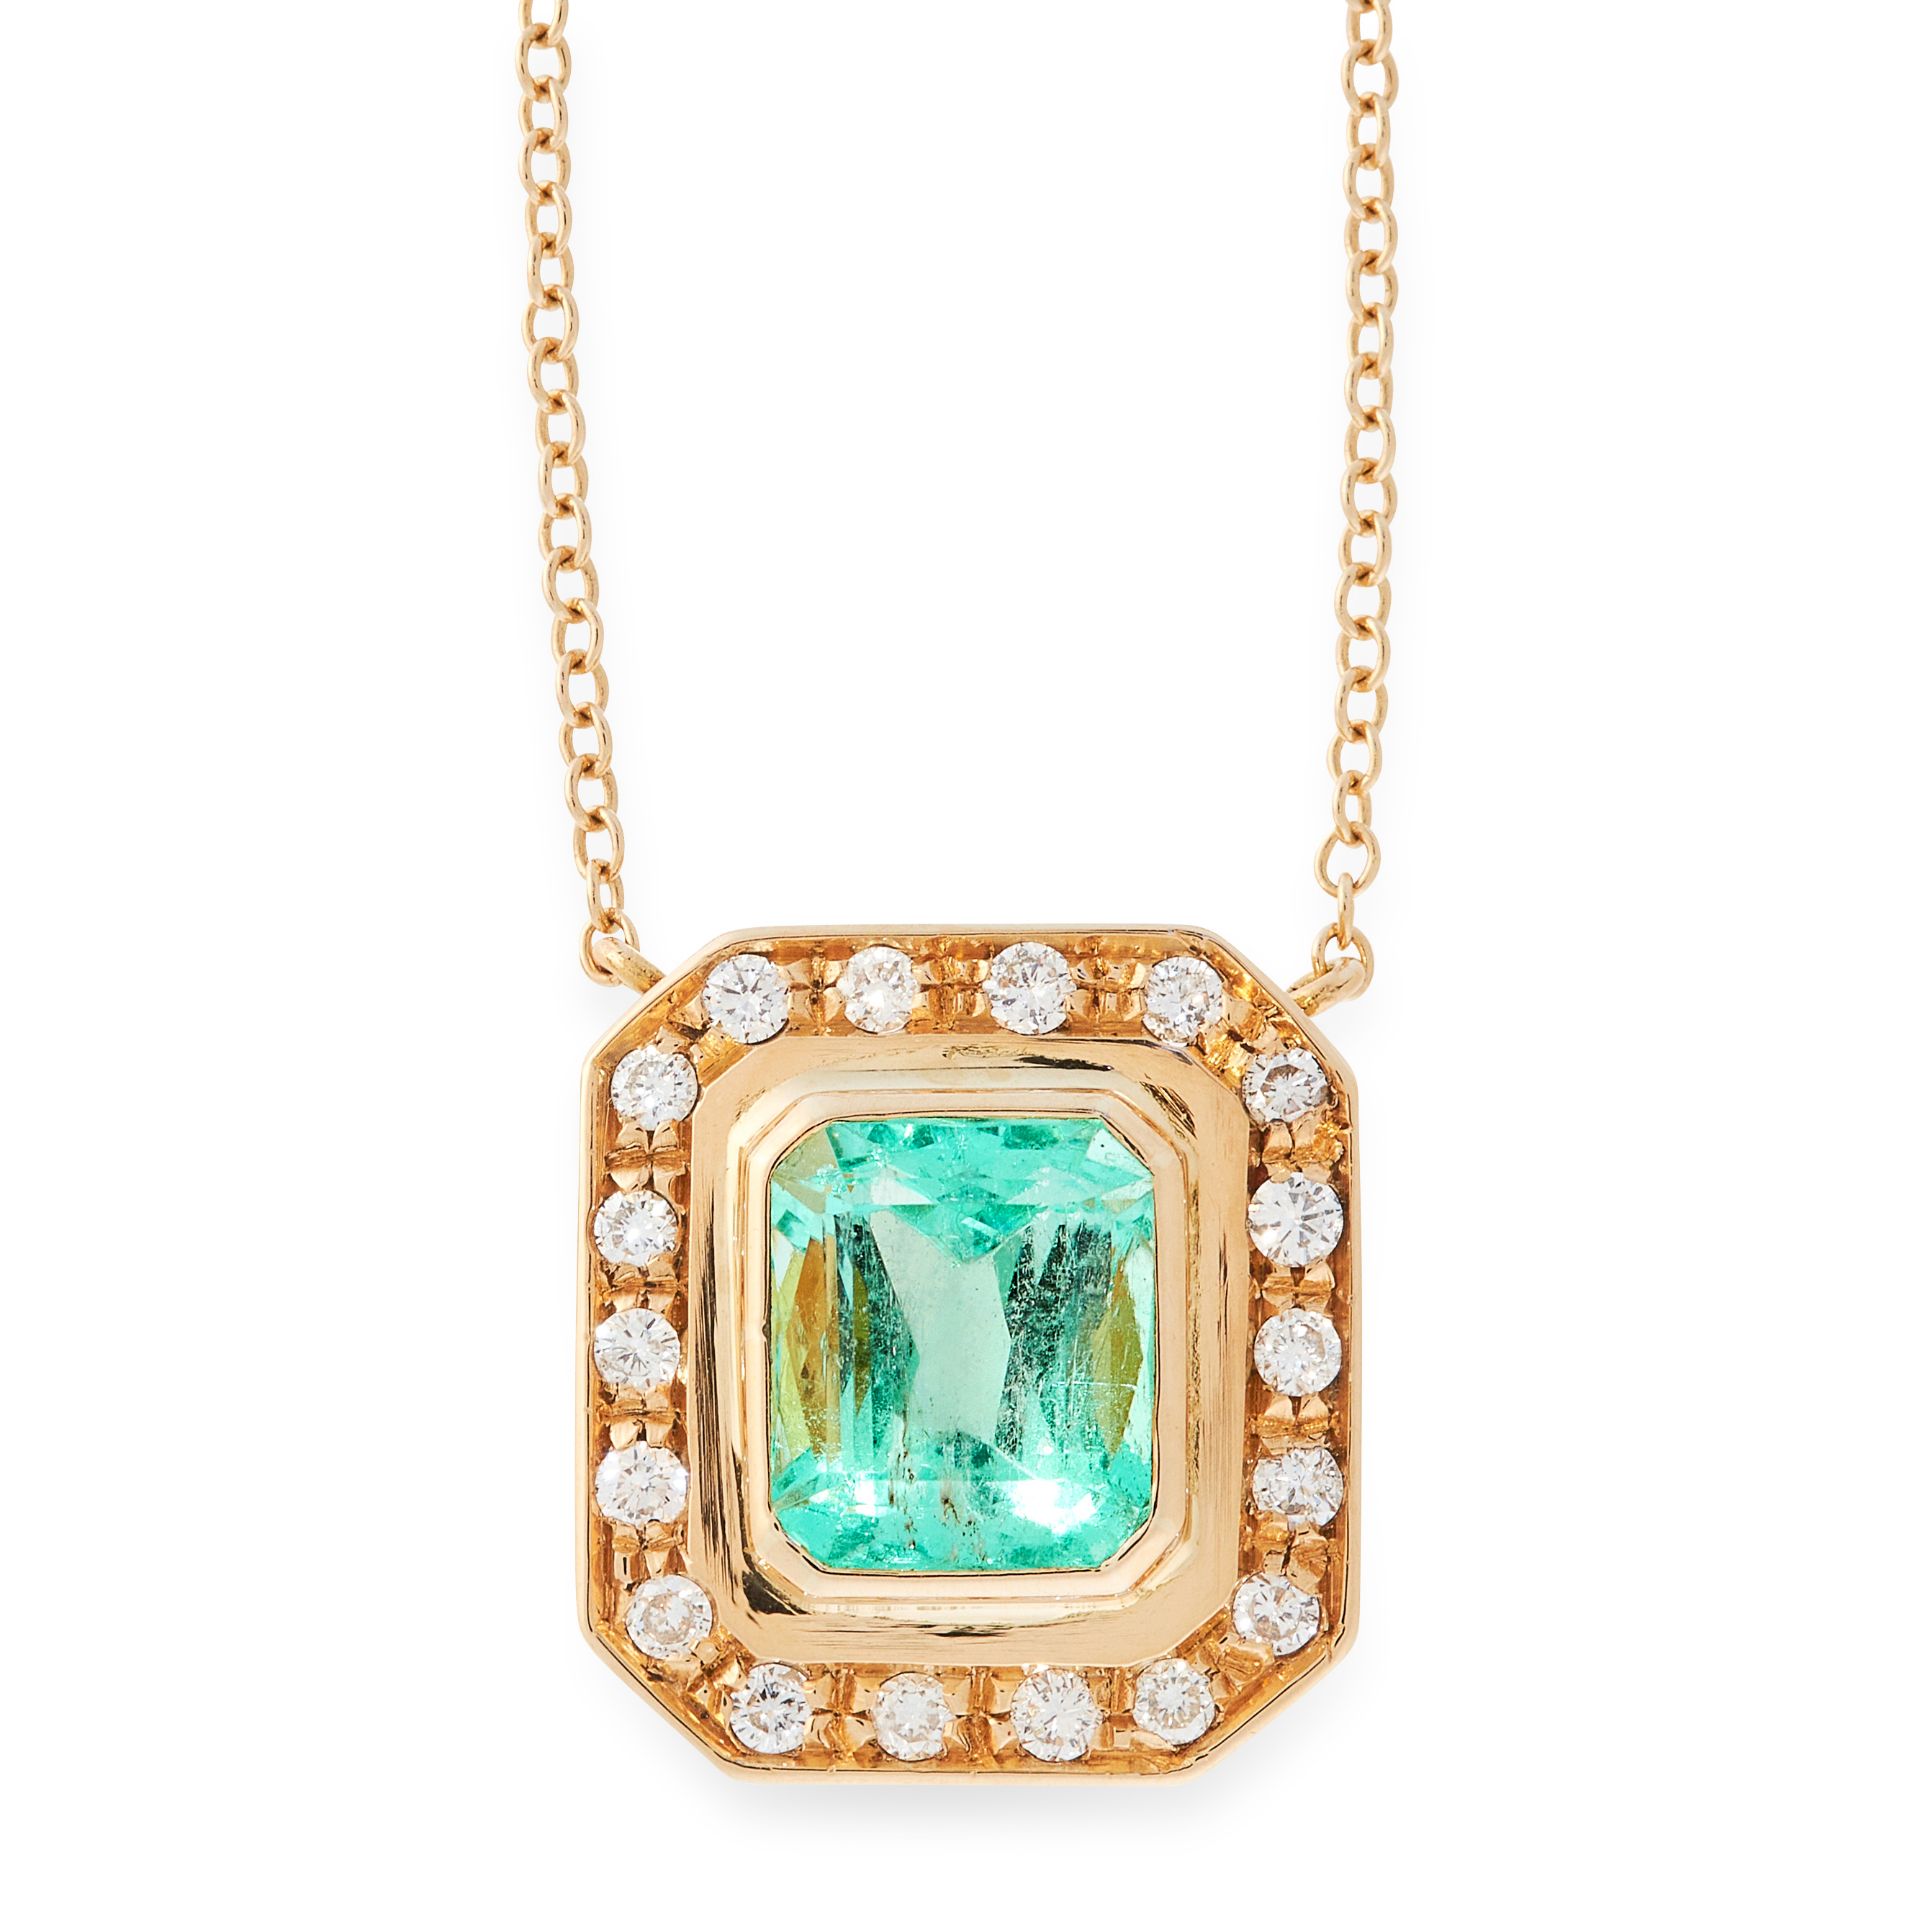 AN EMERALD AND DIAMOND PENDANT NECKLACE in 18ct yellow gold, set with an emerald cut emerald of 3.93